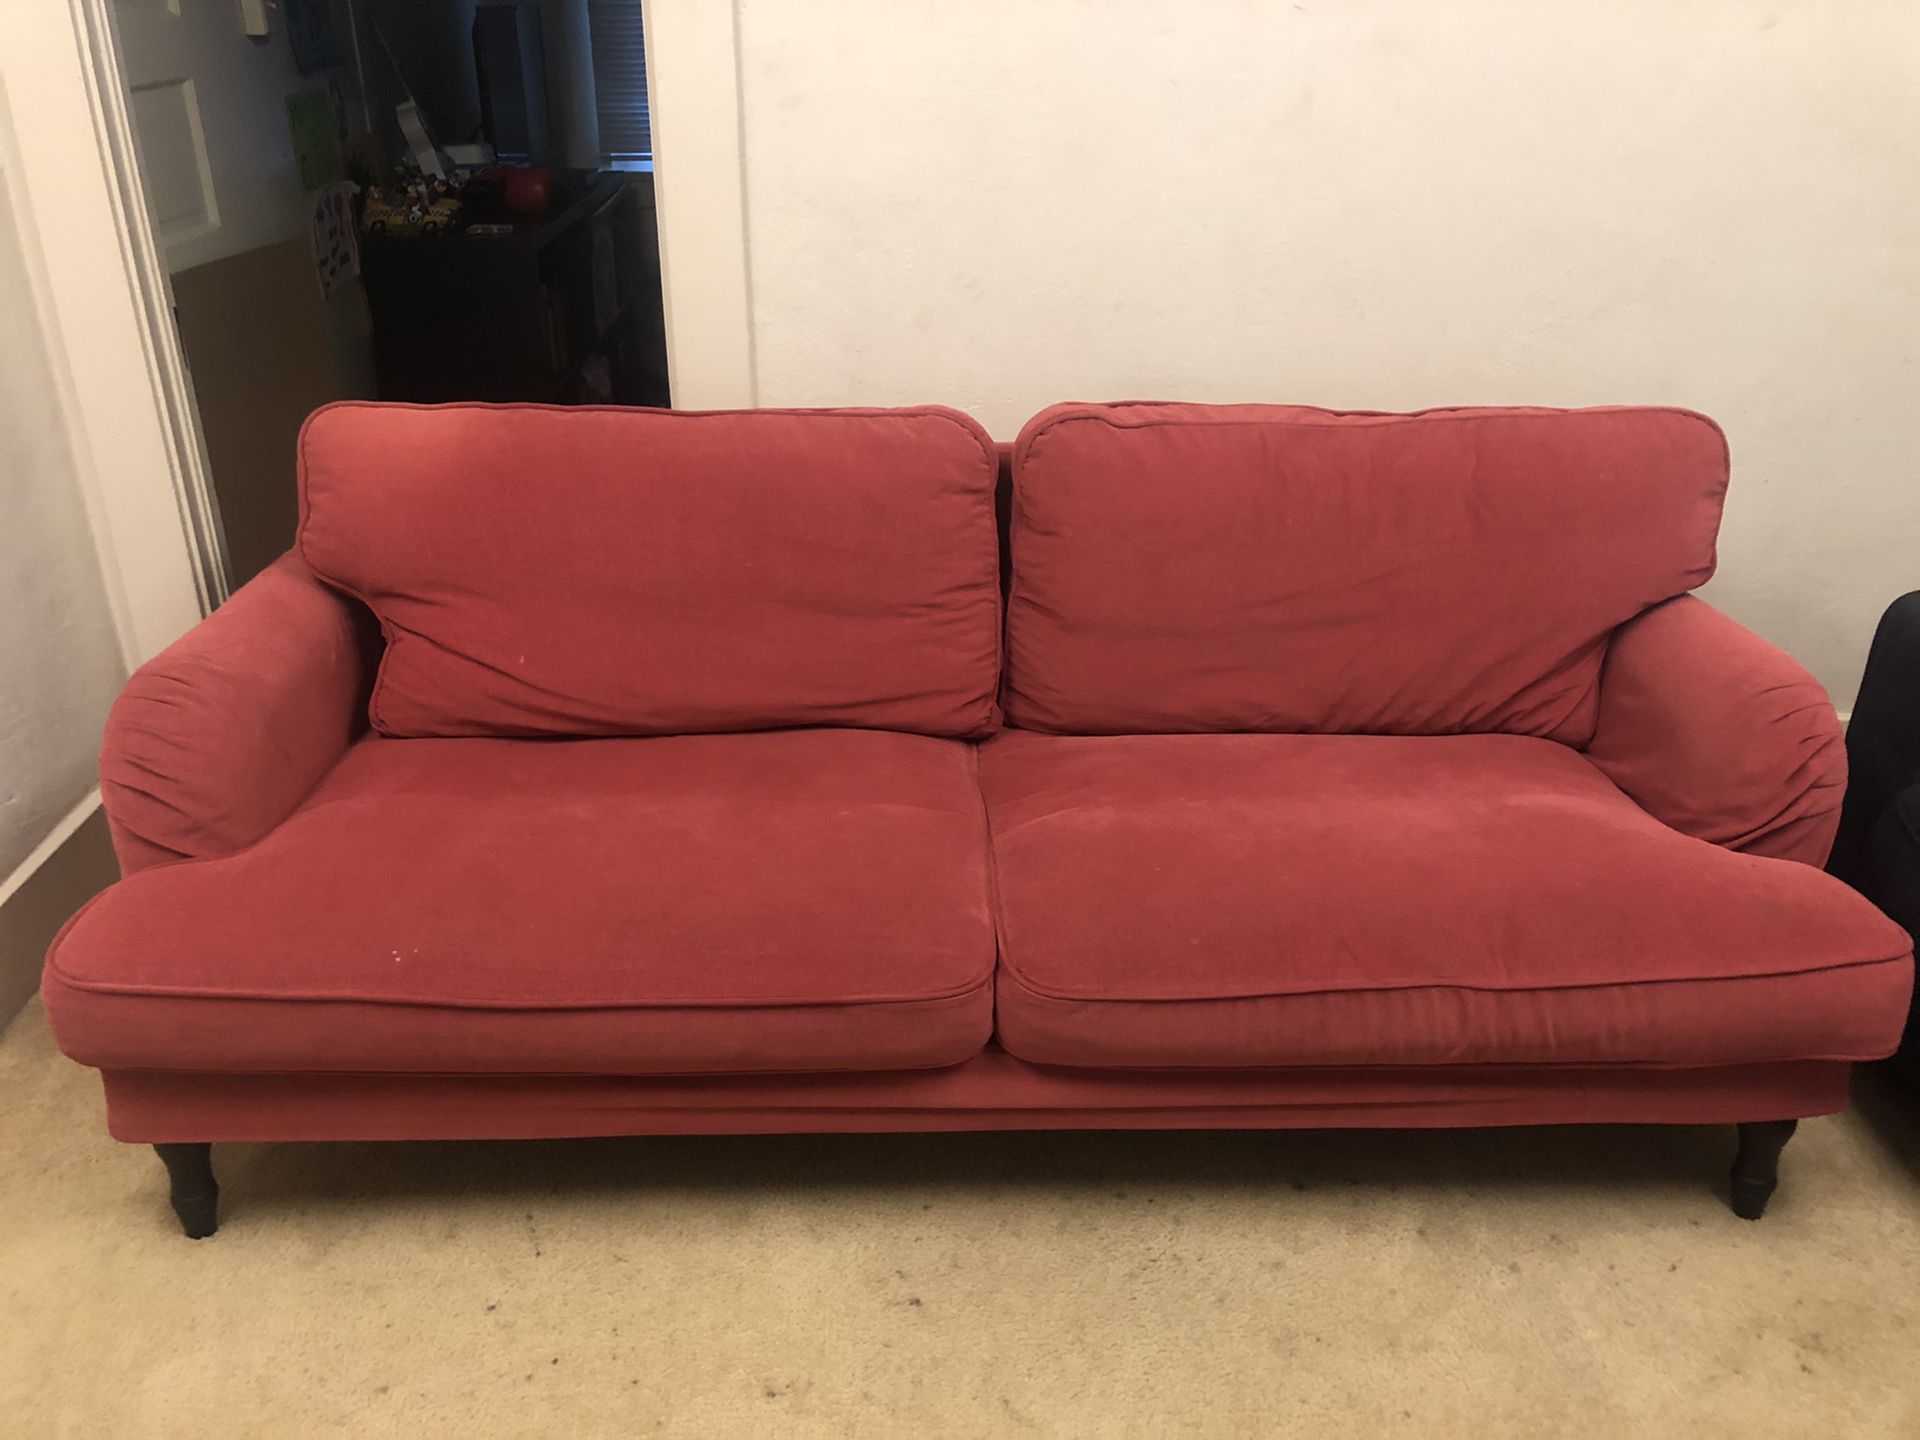 Sofa/ couch